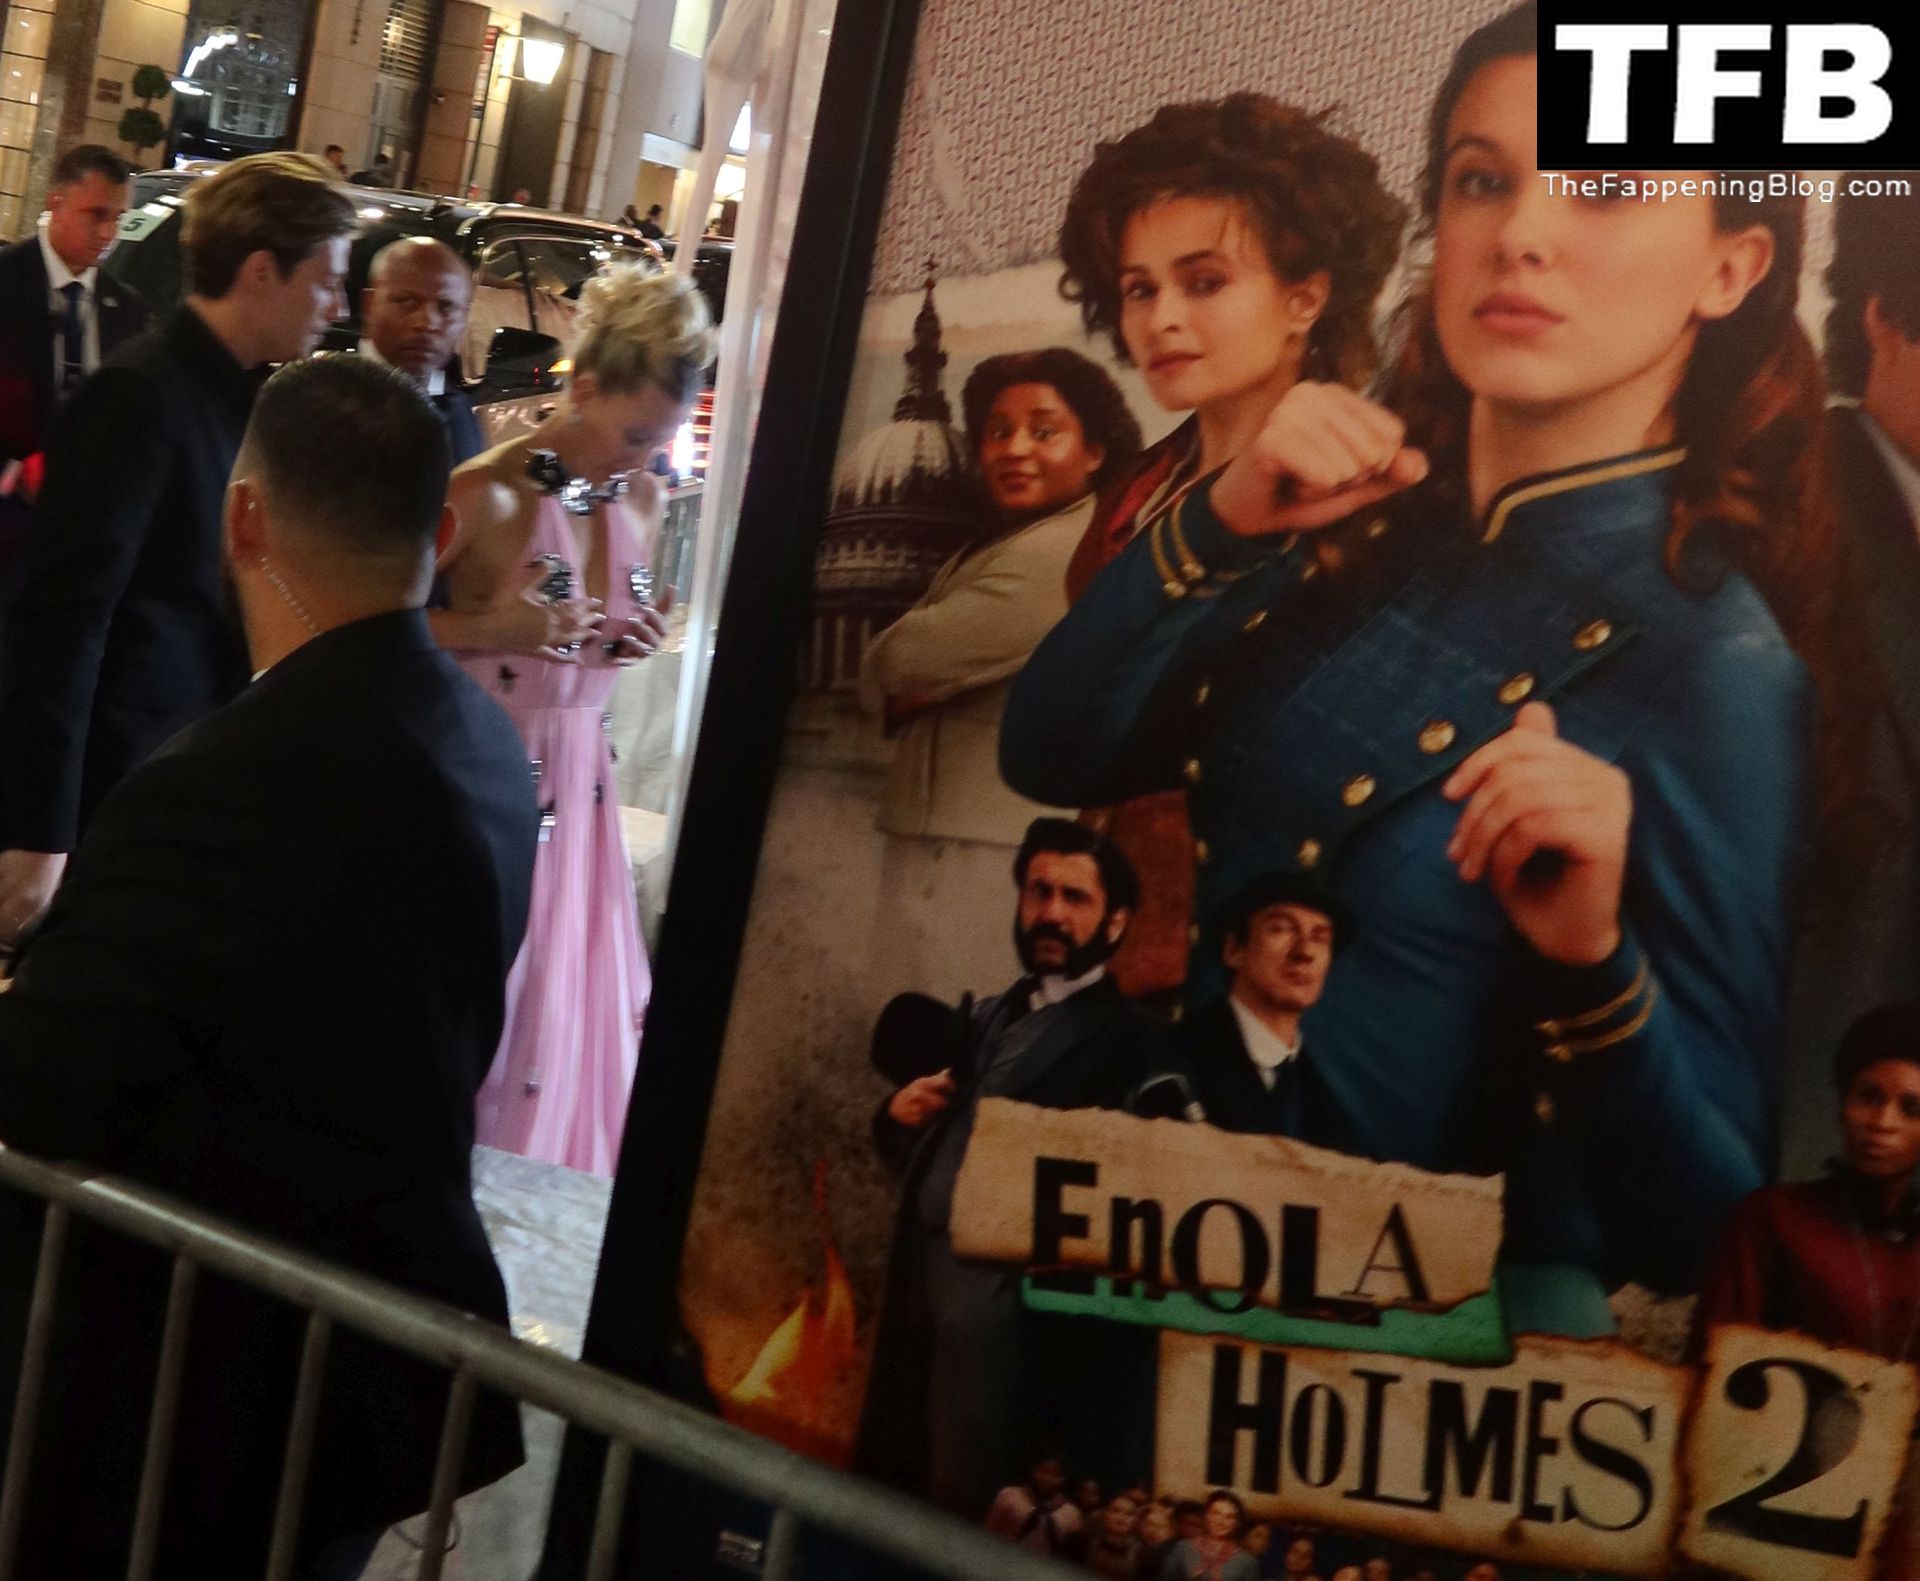 Millie Bobby Brown Looks Sexy at the World Premiere of Netflix’s ‘Enola Holmes 2’ in NYC (150 Photos)